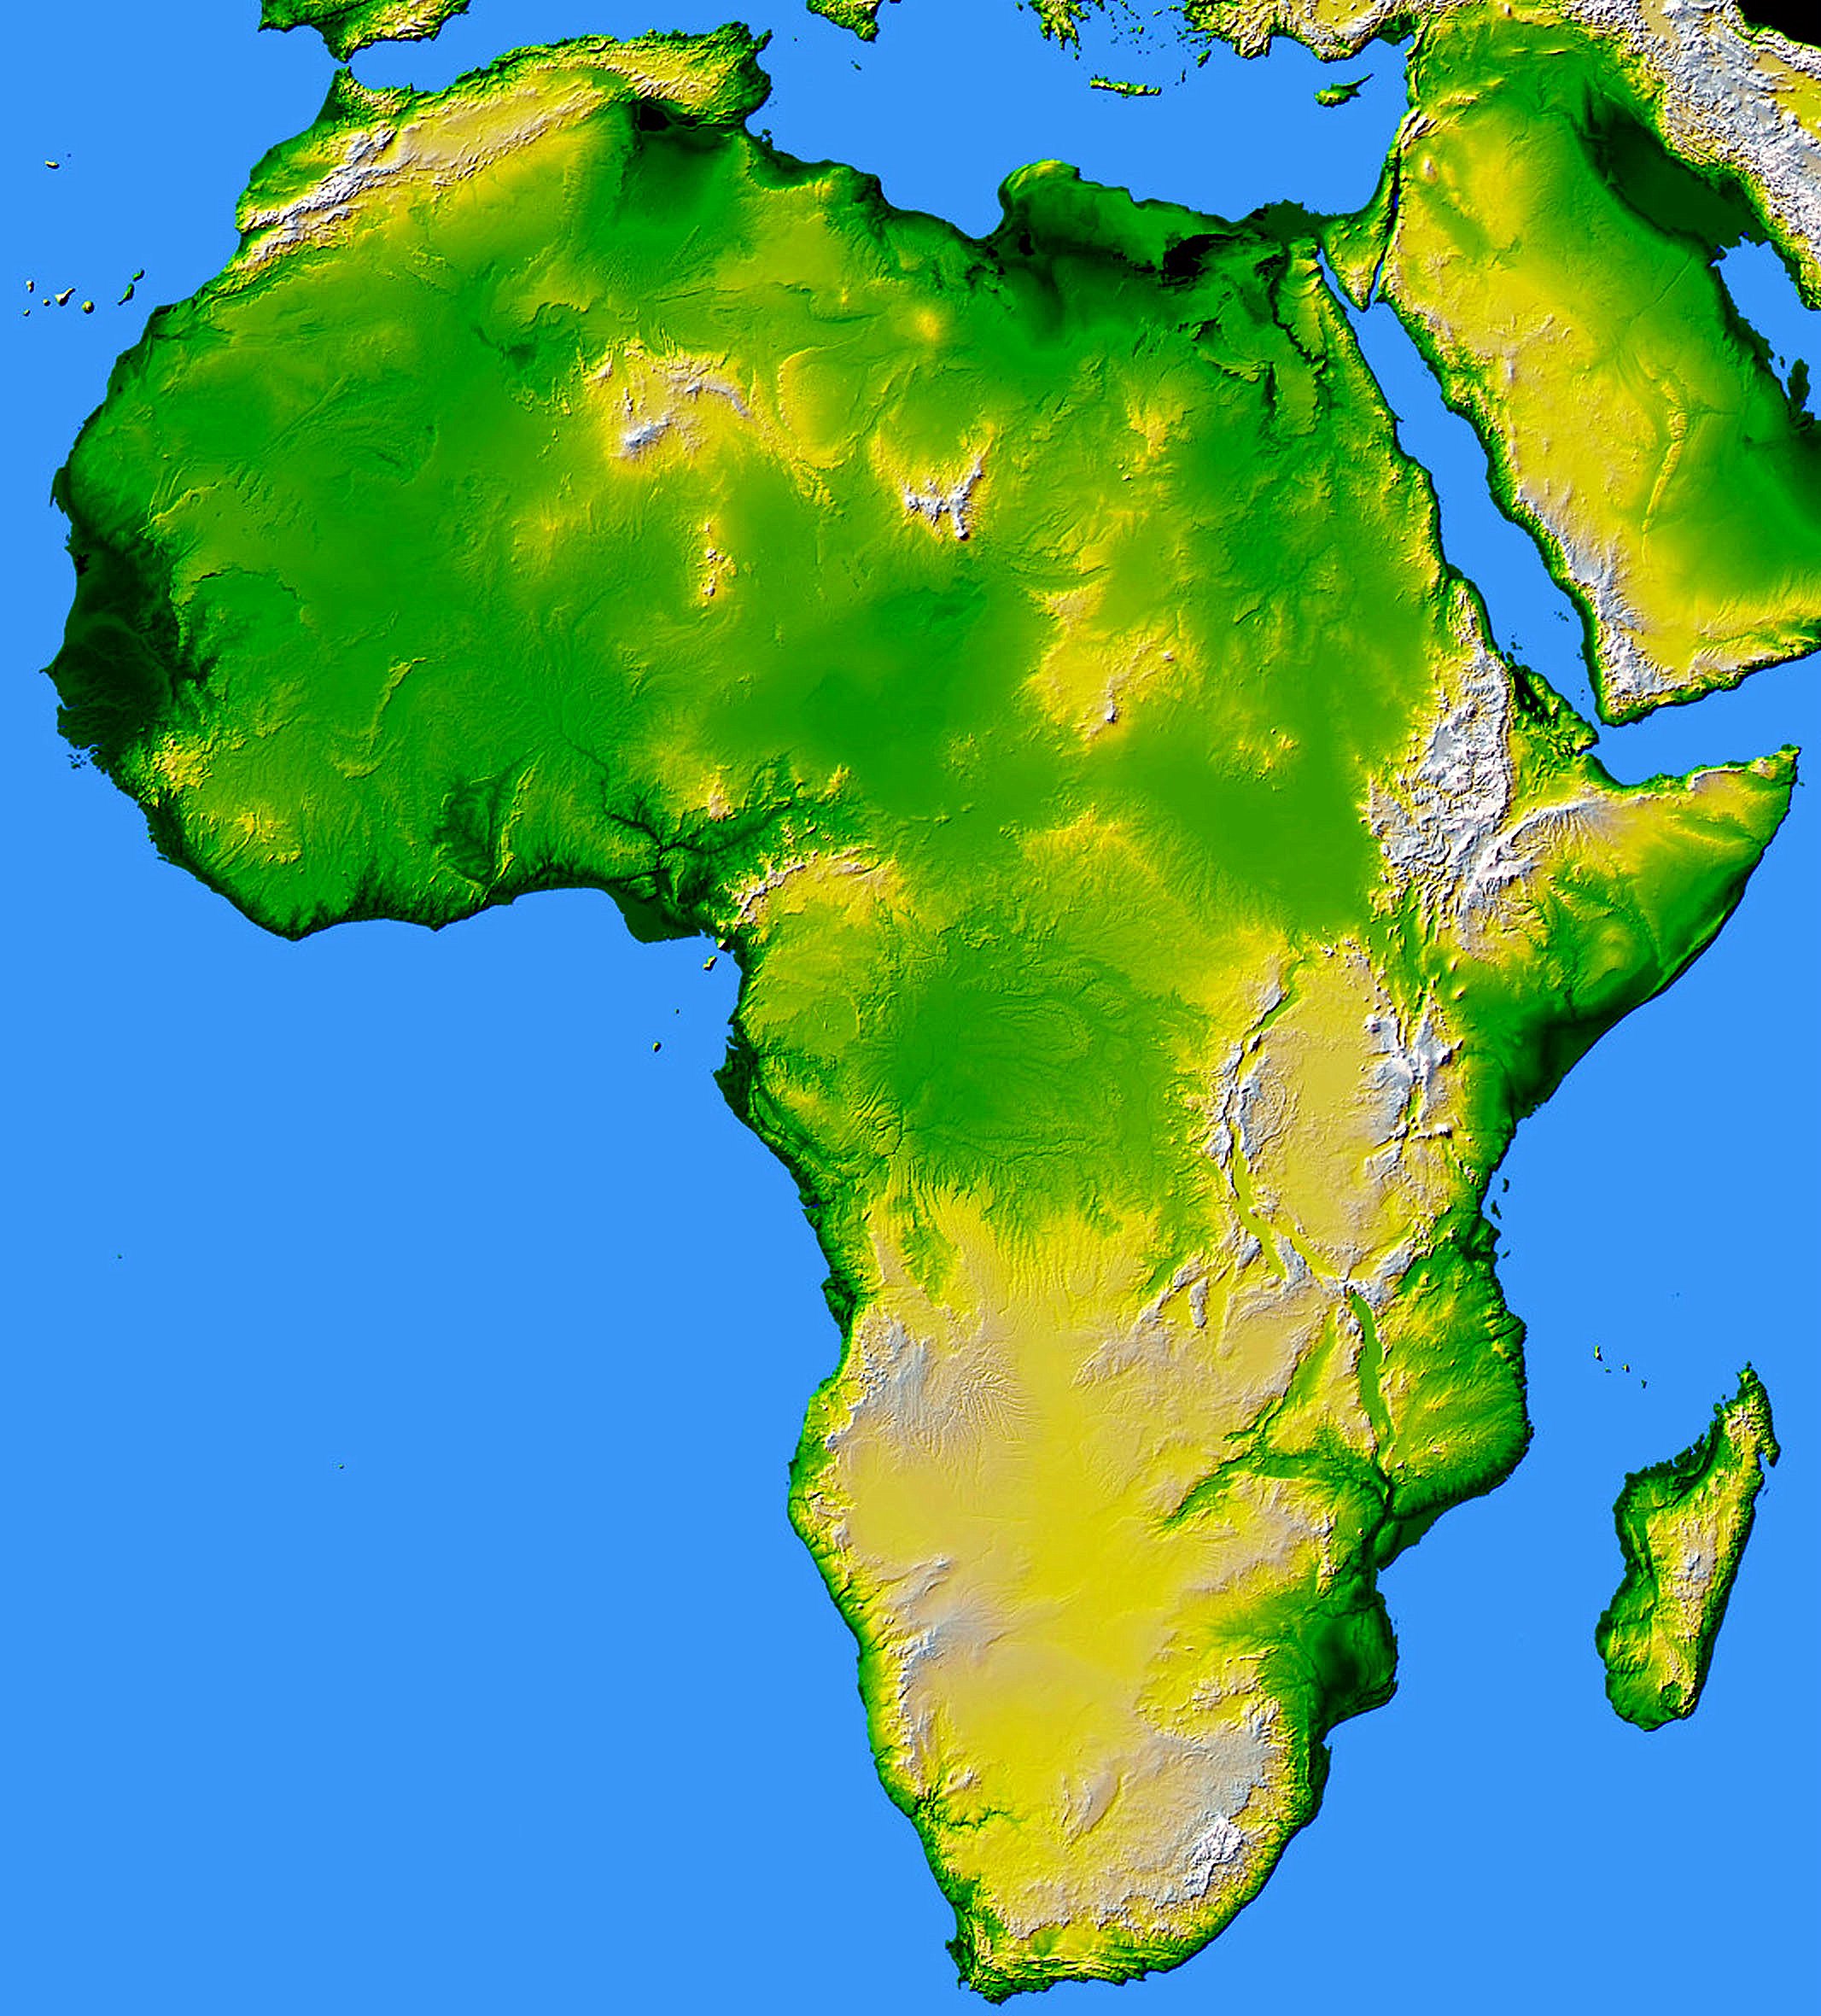 Full color elevation map of Africa.